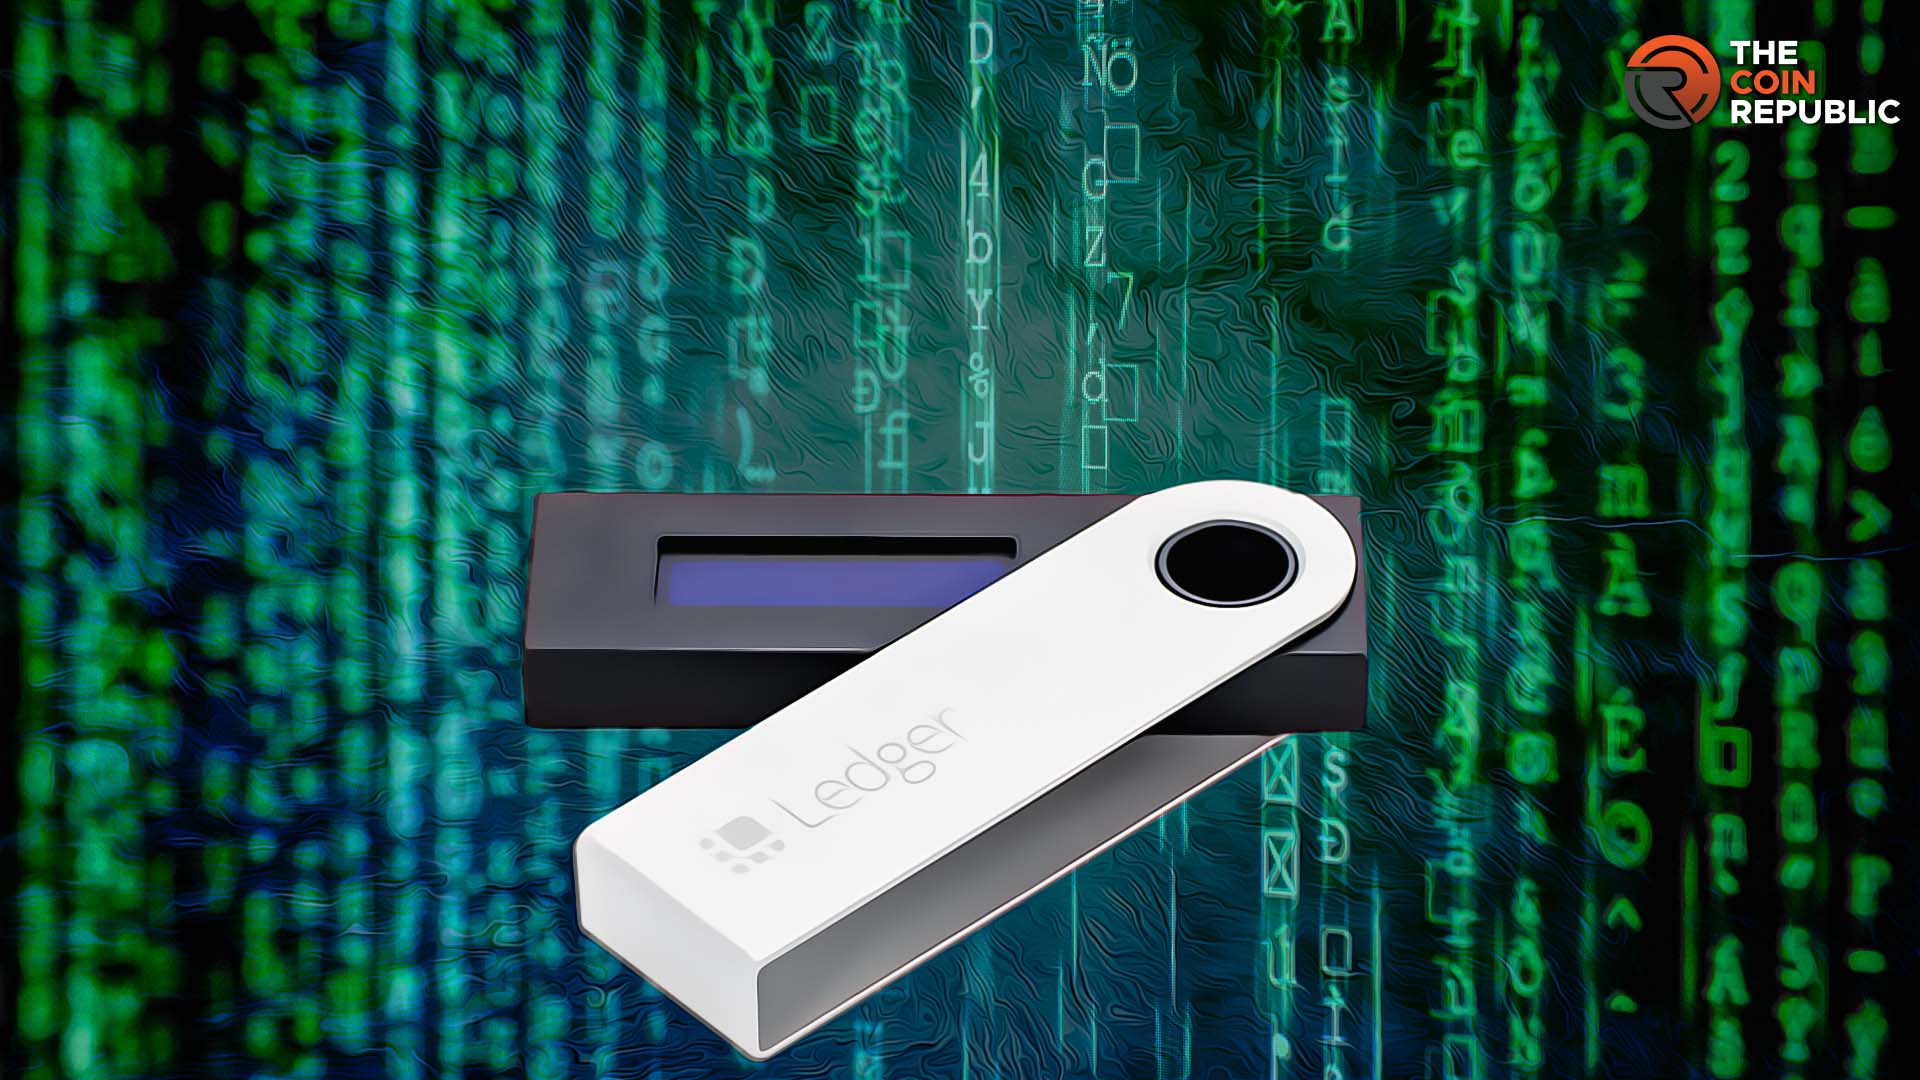 Battling Ledger Recover Paused, Declares To Open Source Code 